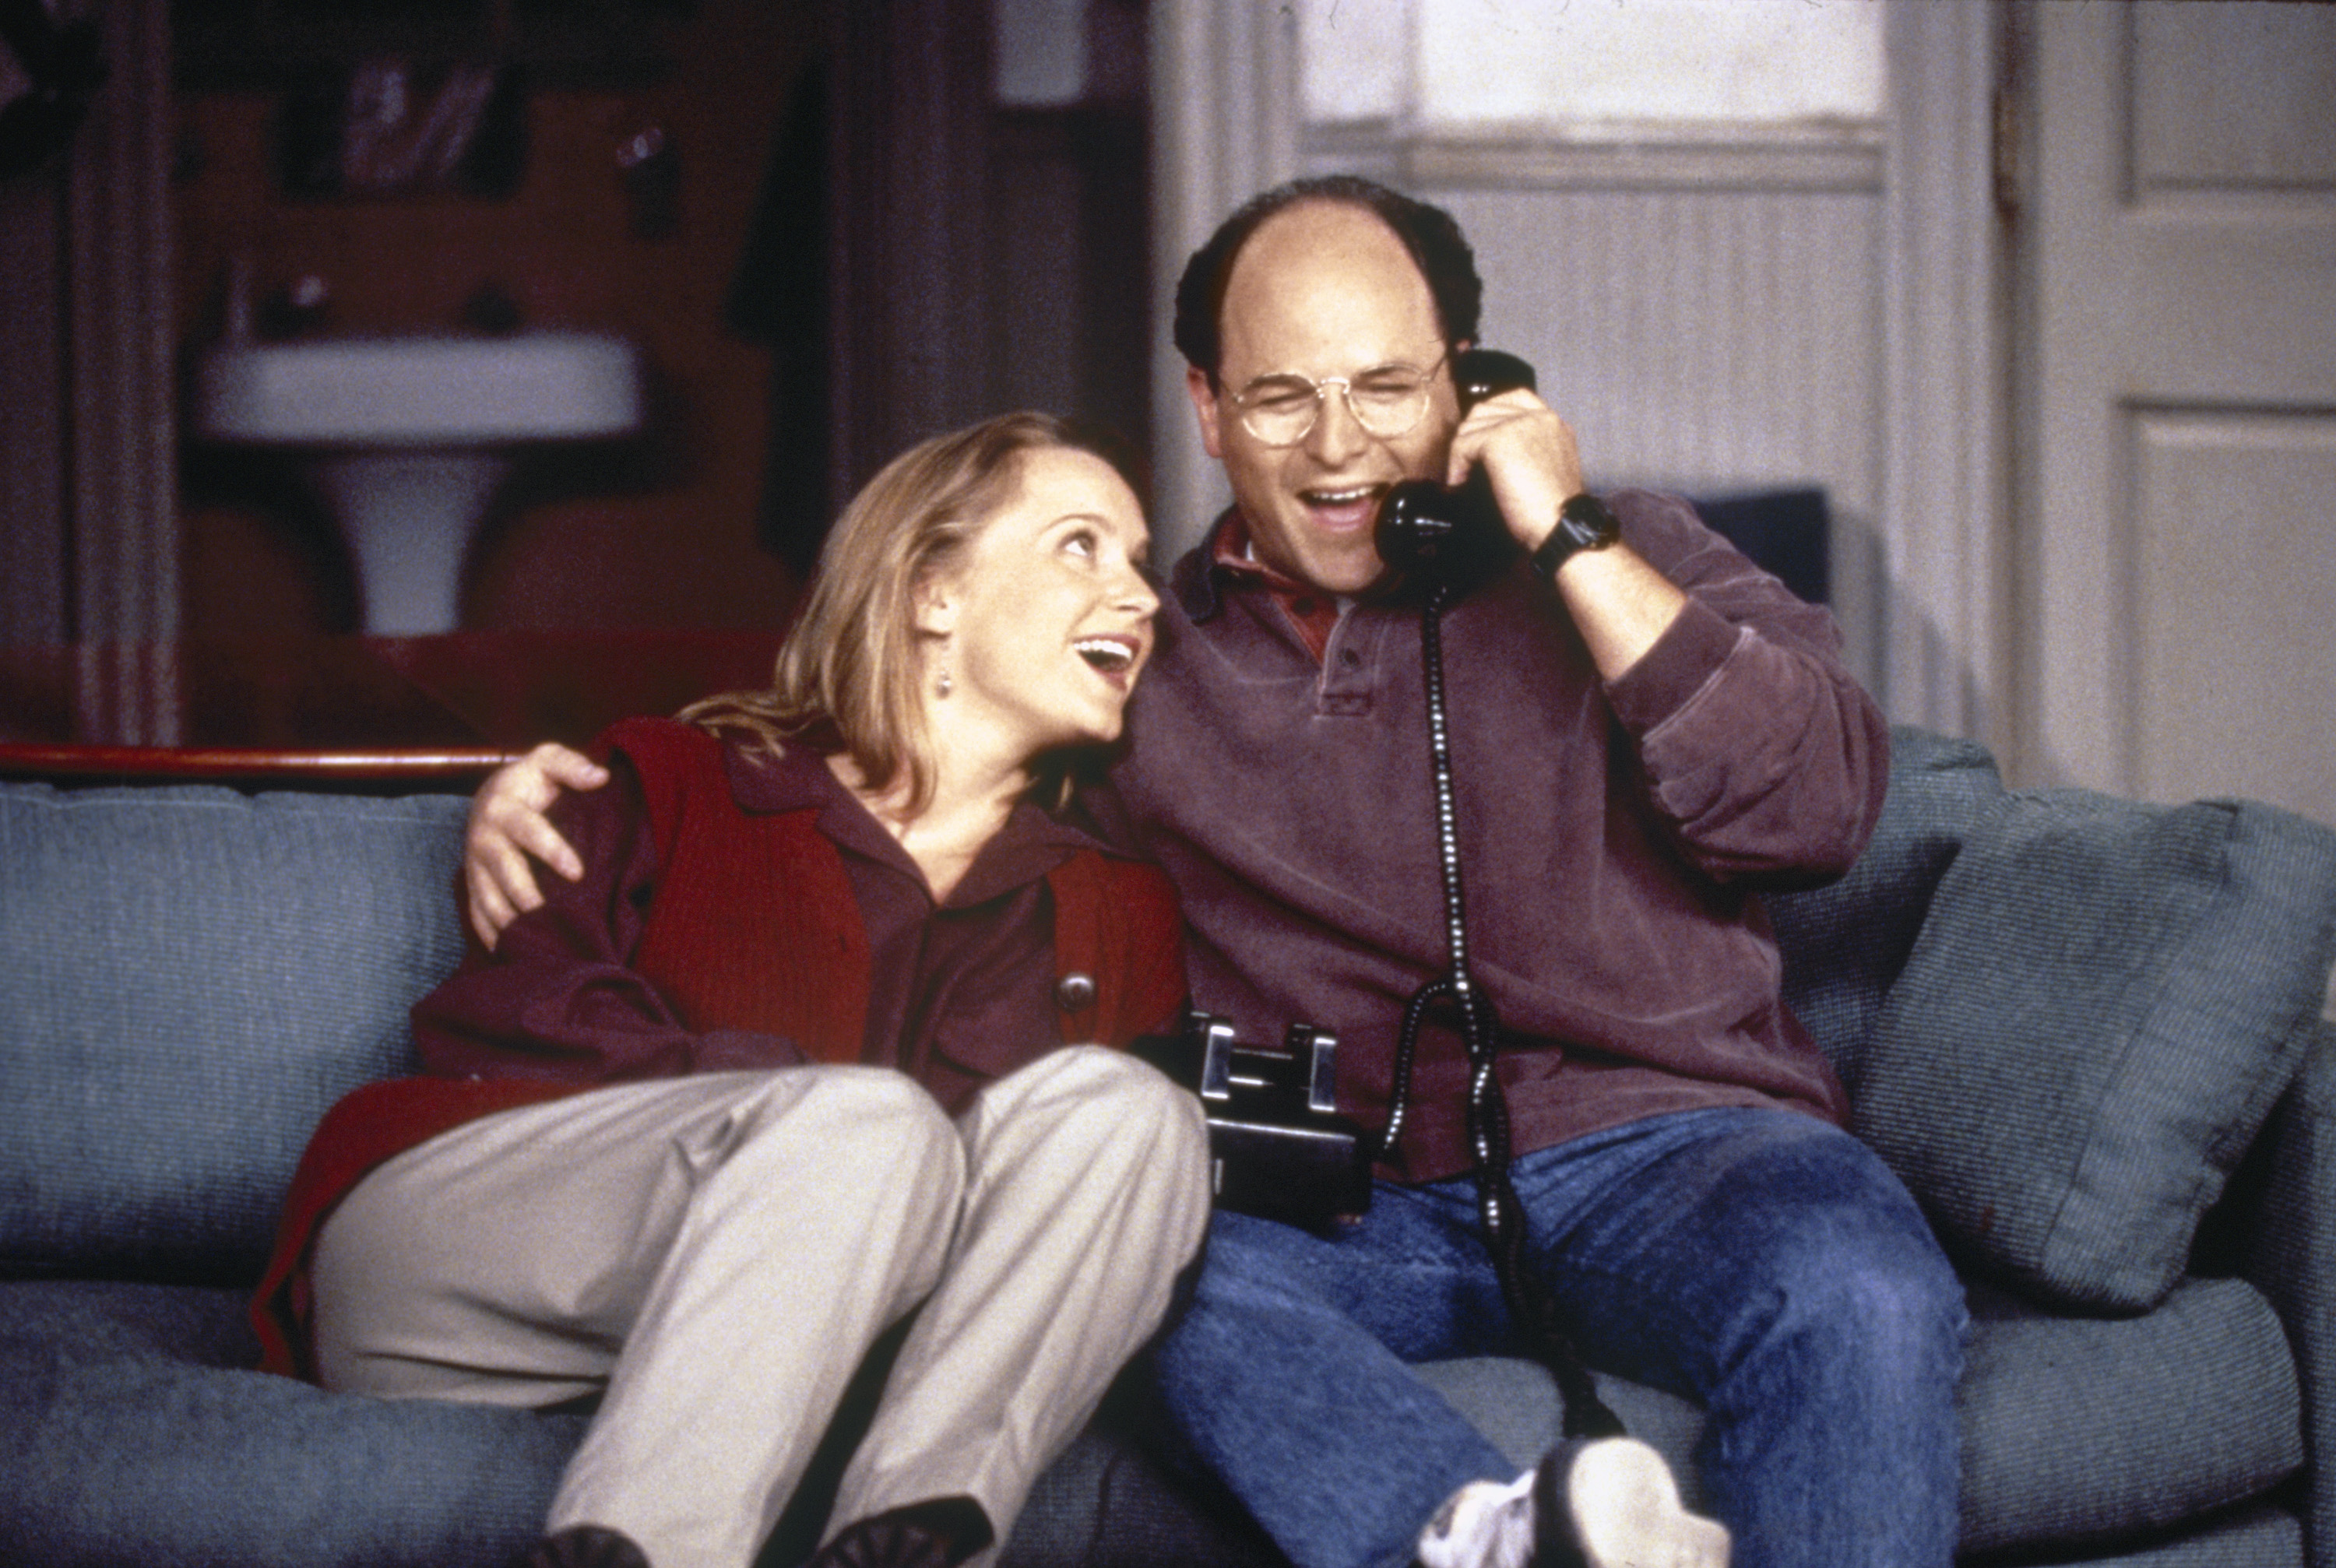 left to right: Heidi Swedberg as Susan Ross and Jason Alexander as George Costanza in a scene from 'Seinfeld'